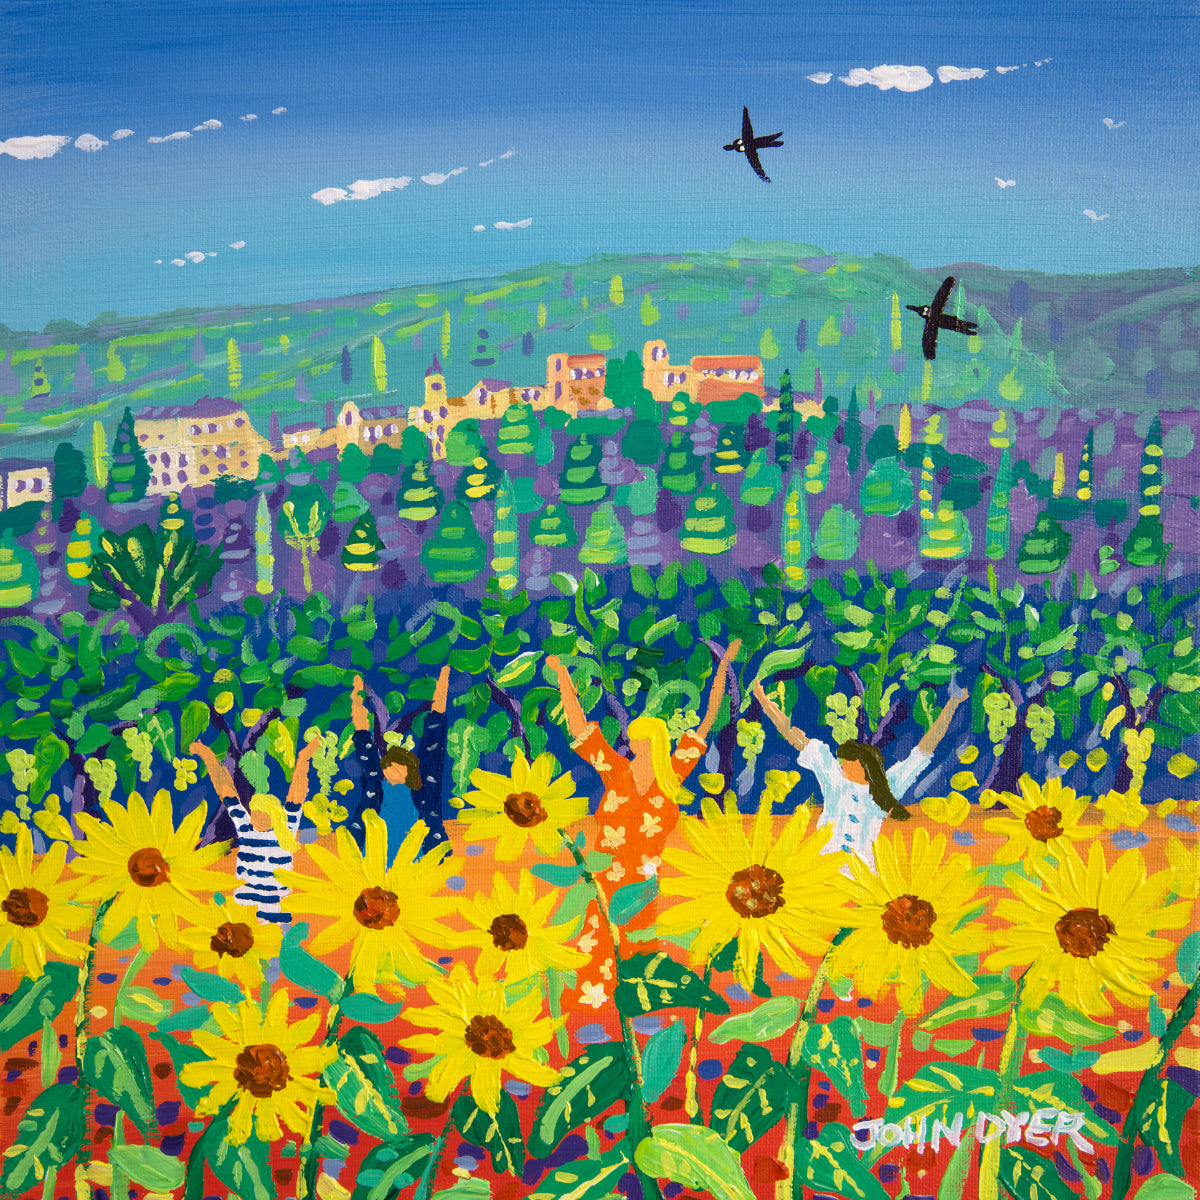 John Dyer Painting. Jumping in the Sunflowers, Ménerbes, Provence